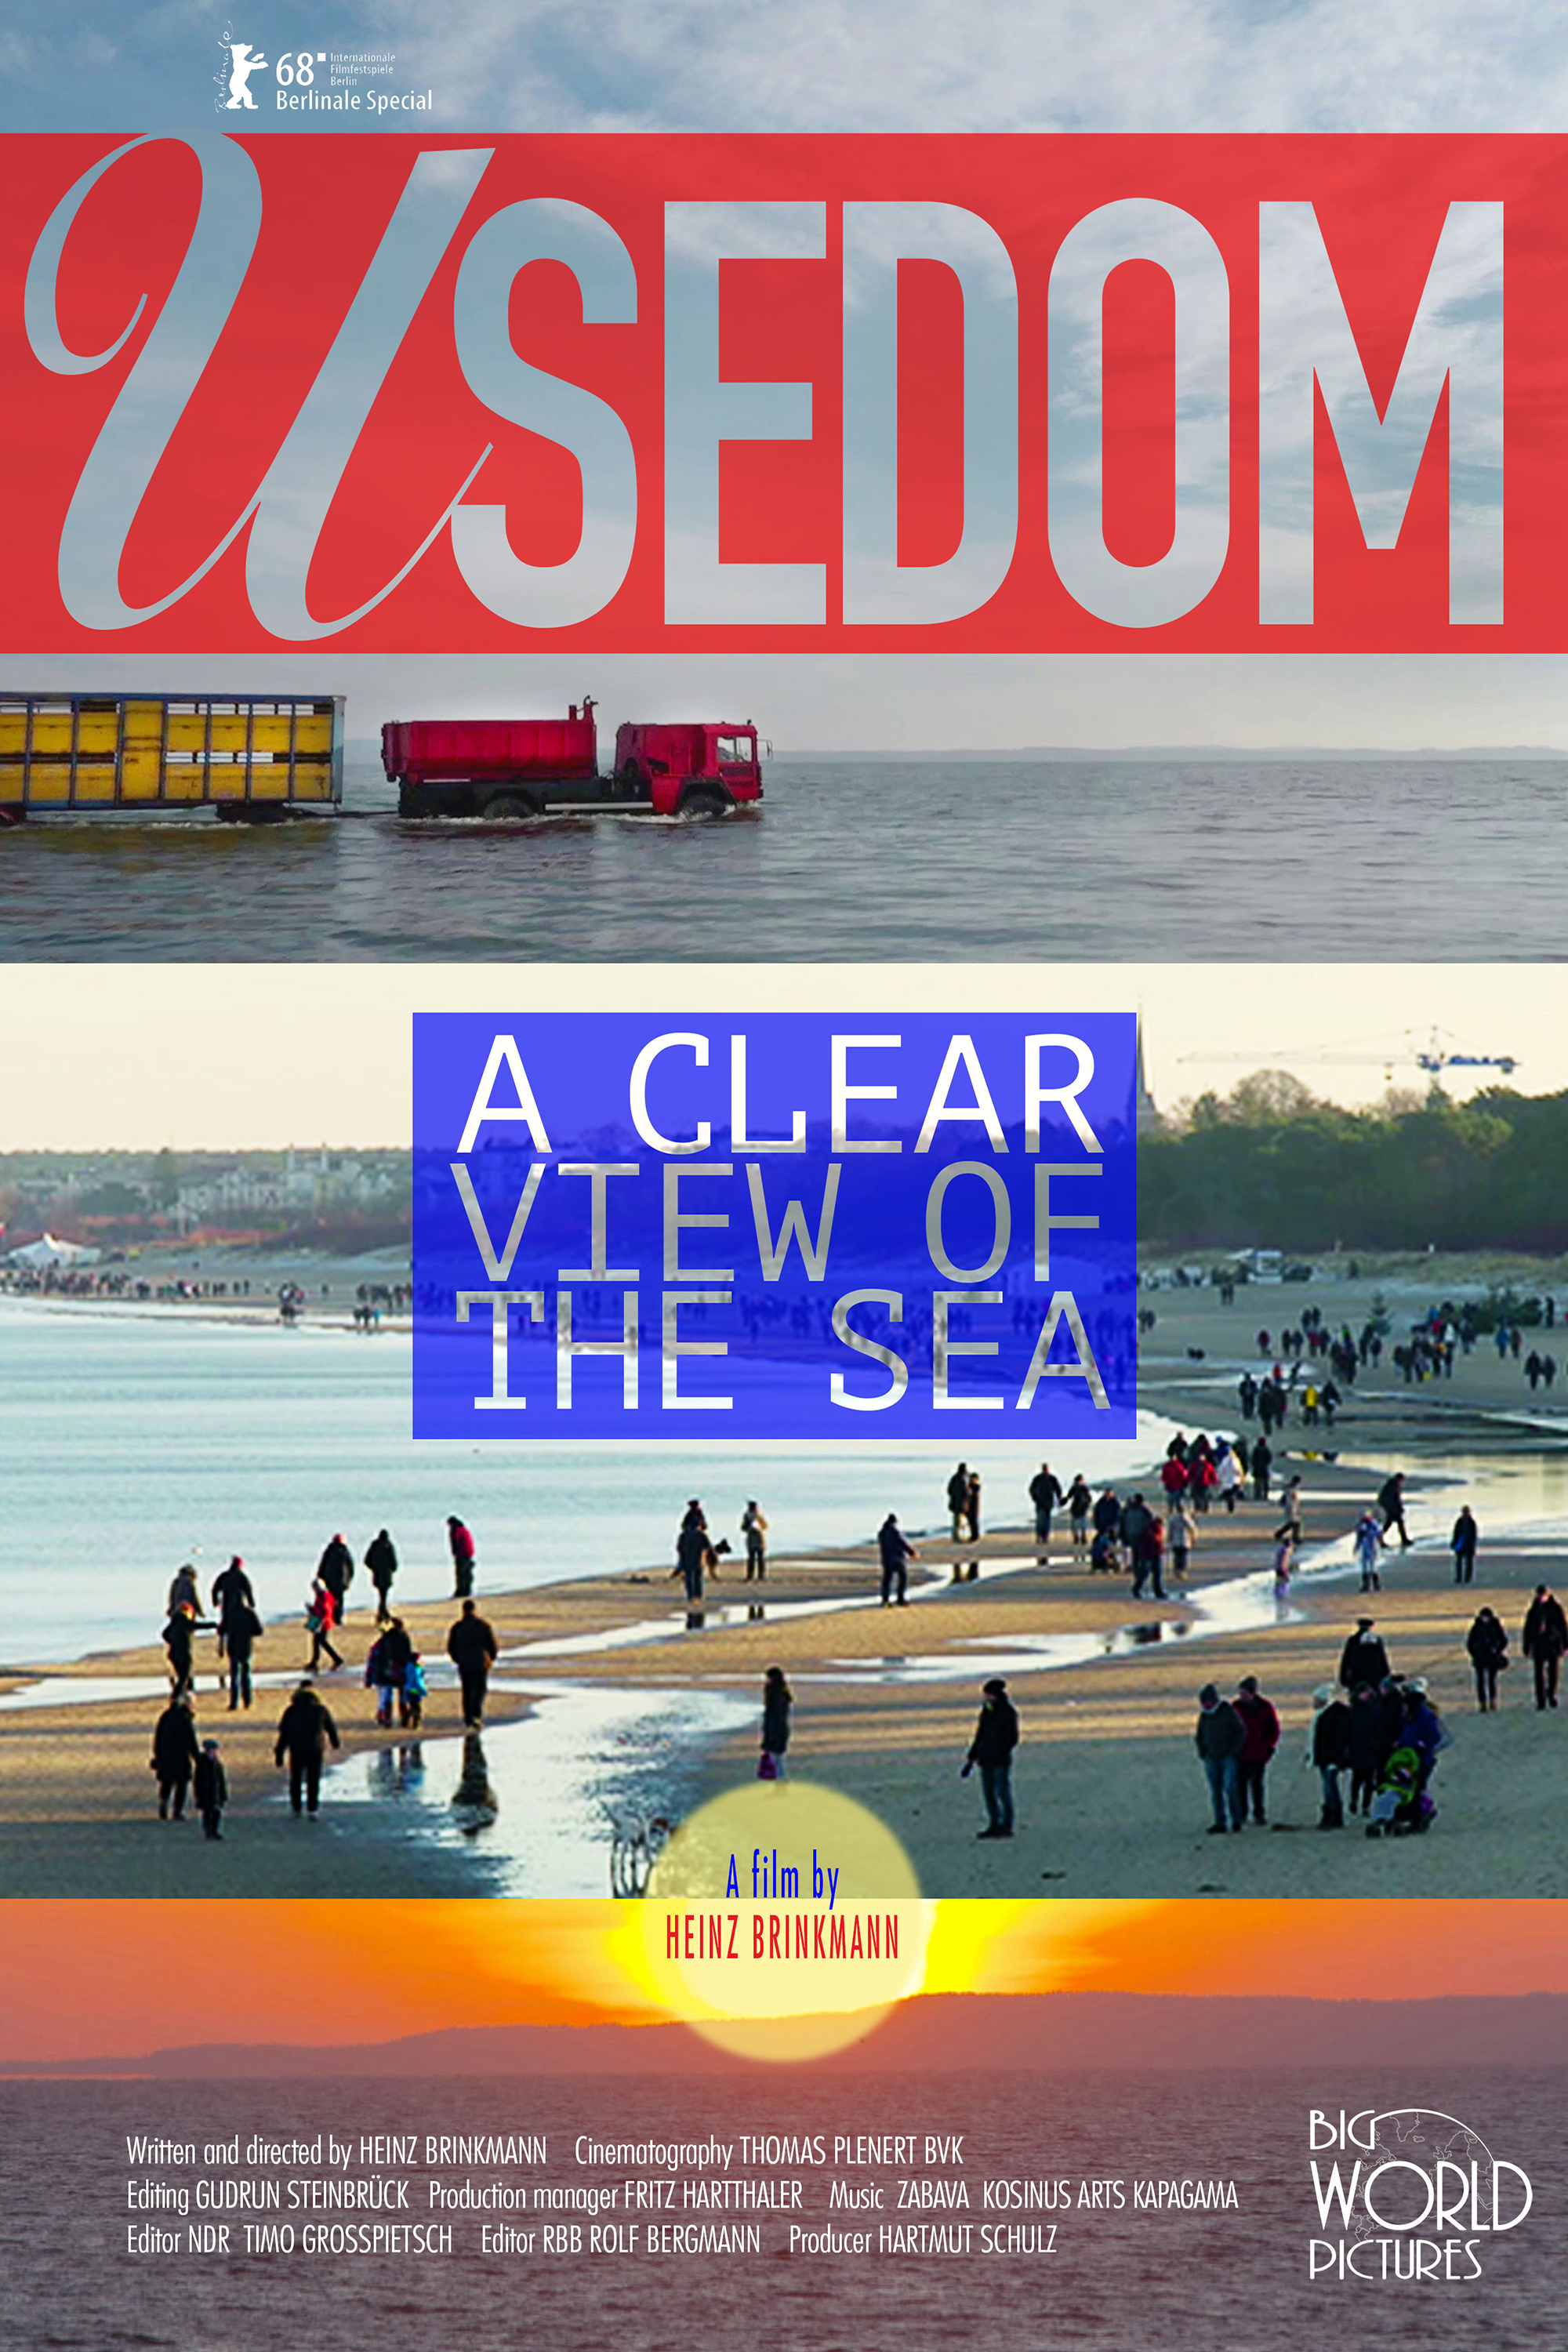 Usedom: A Clear View of the Sea